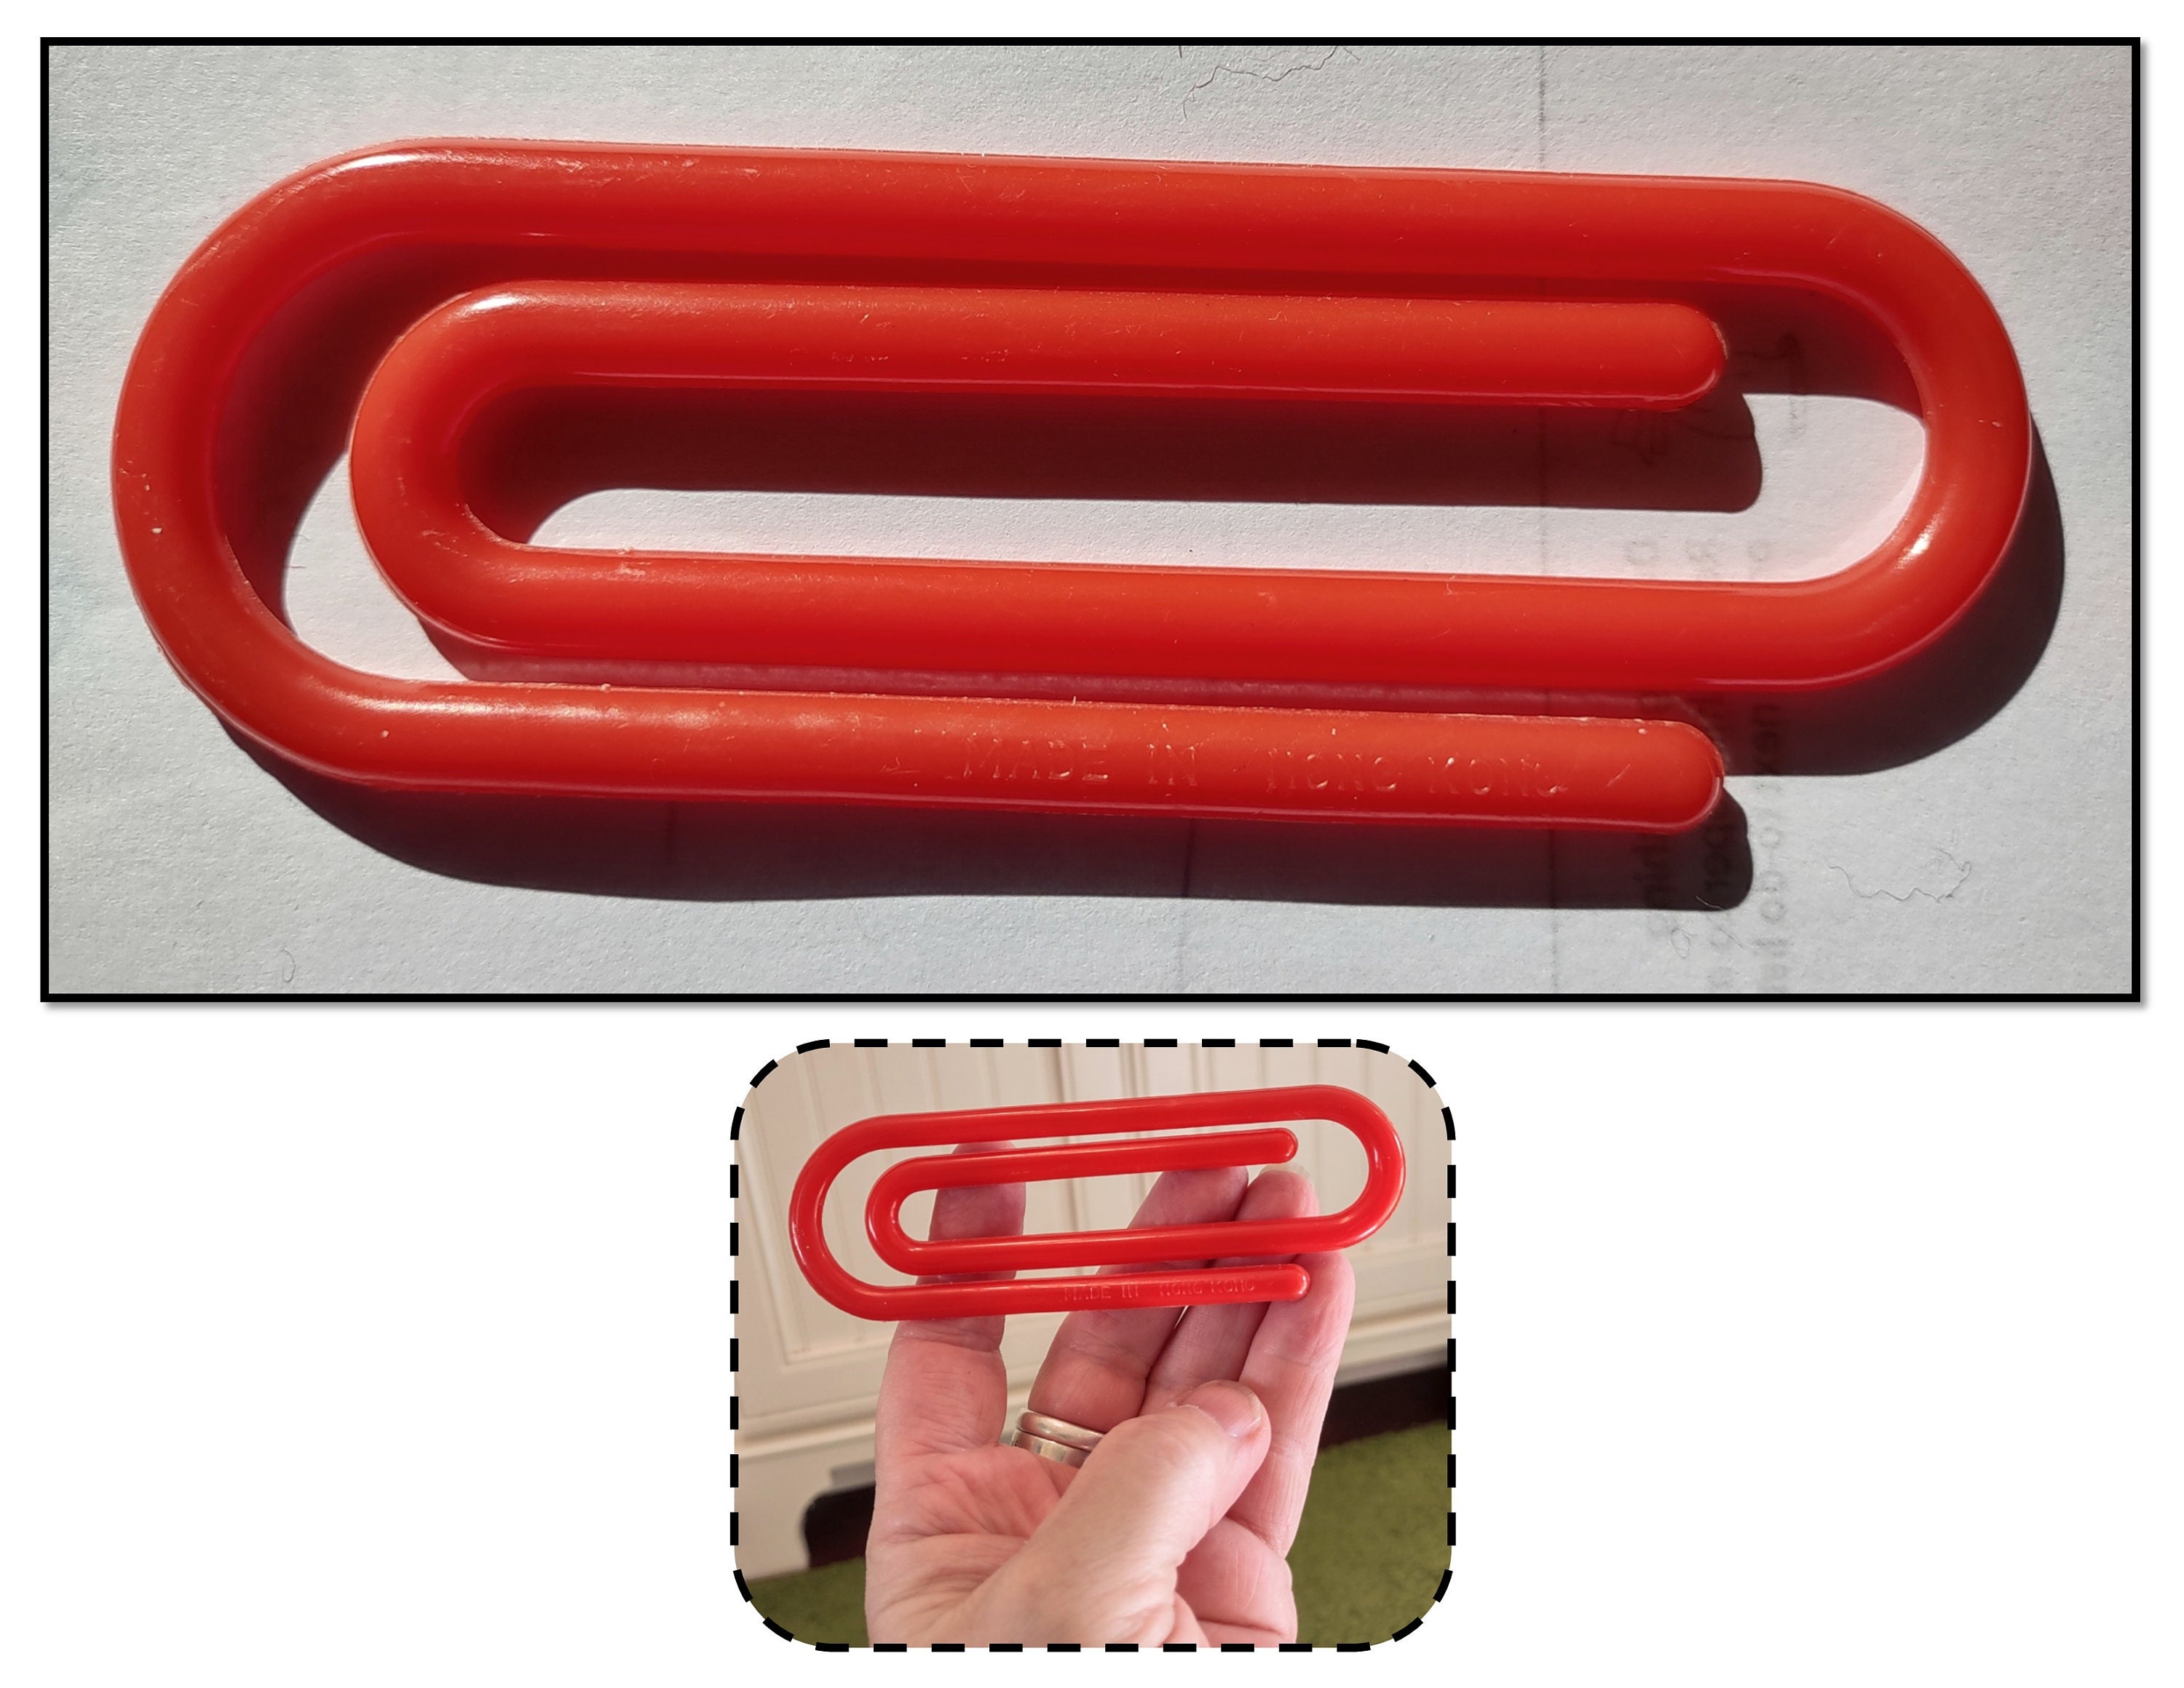 Plastic Paper Clips Latest Price from Manufacturers, Suppliers & Traders